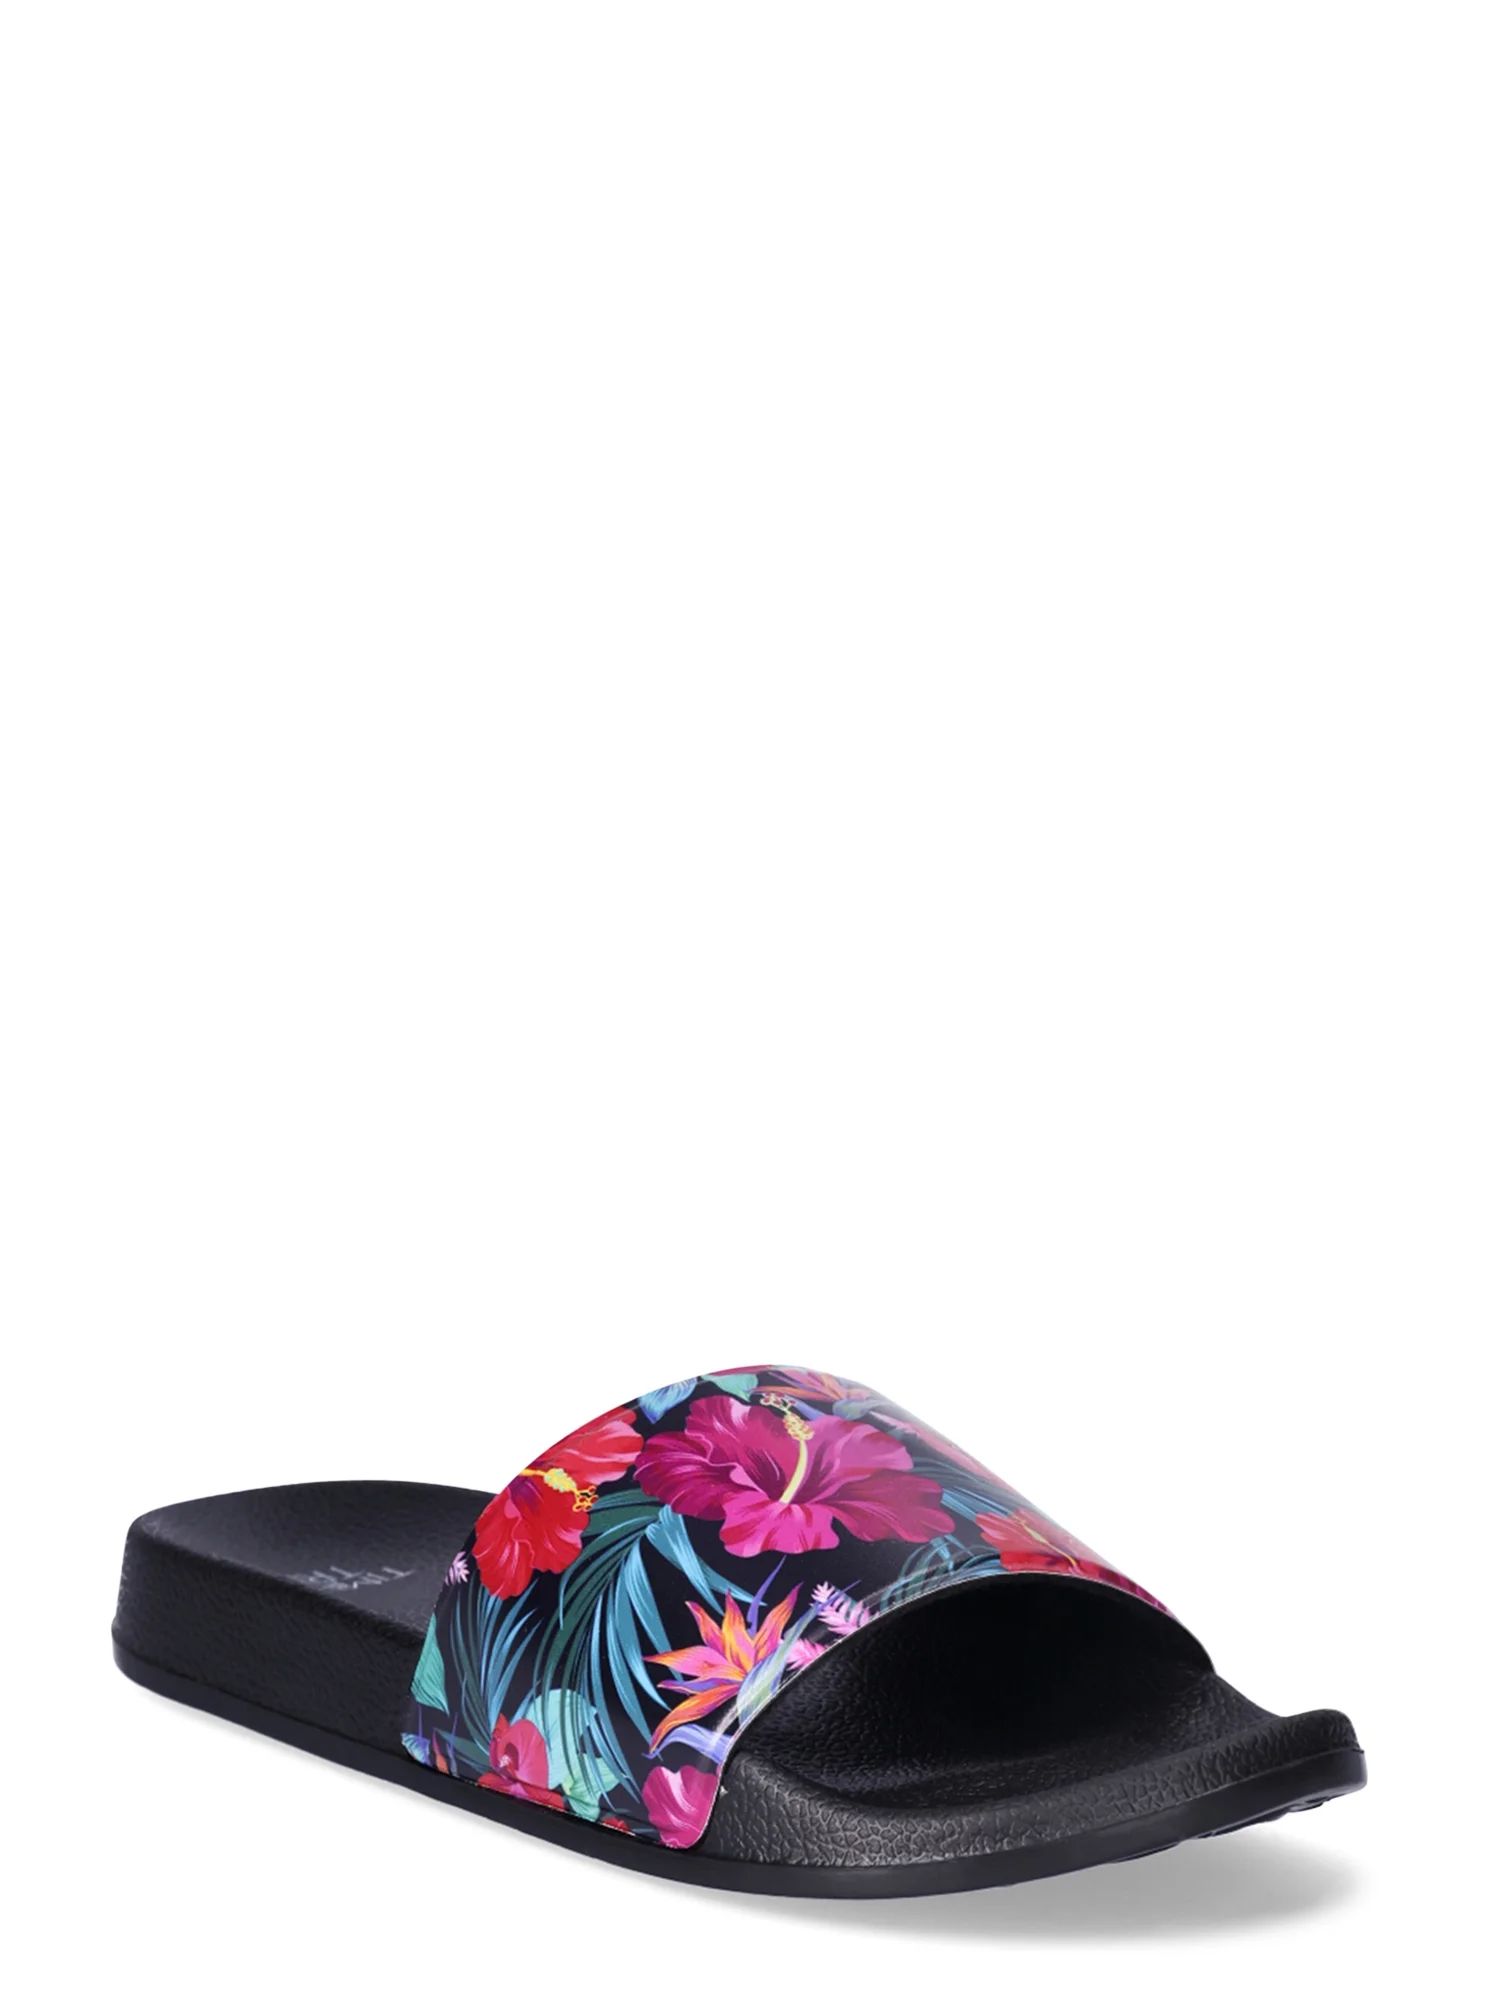 Time and Tru Women's Floral Slide Sandals, Sizes 6-11 | Walmart (US)